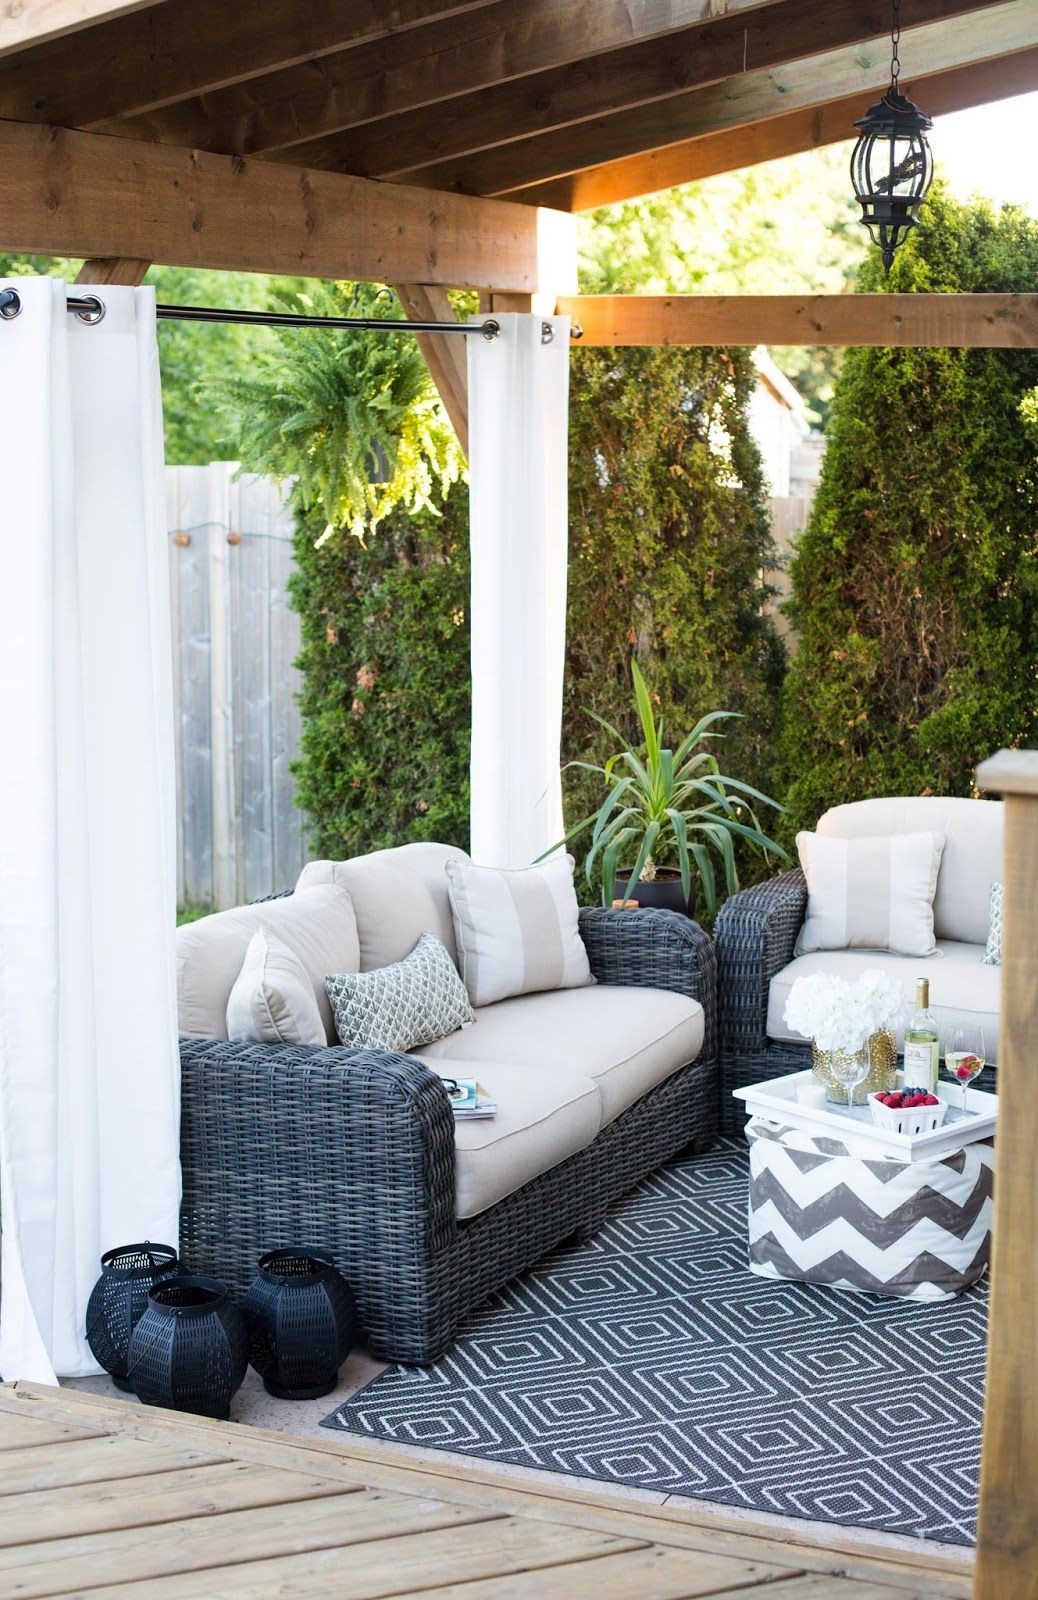 DIY Outdoor Covered Patio
 Covered Patio Reveal